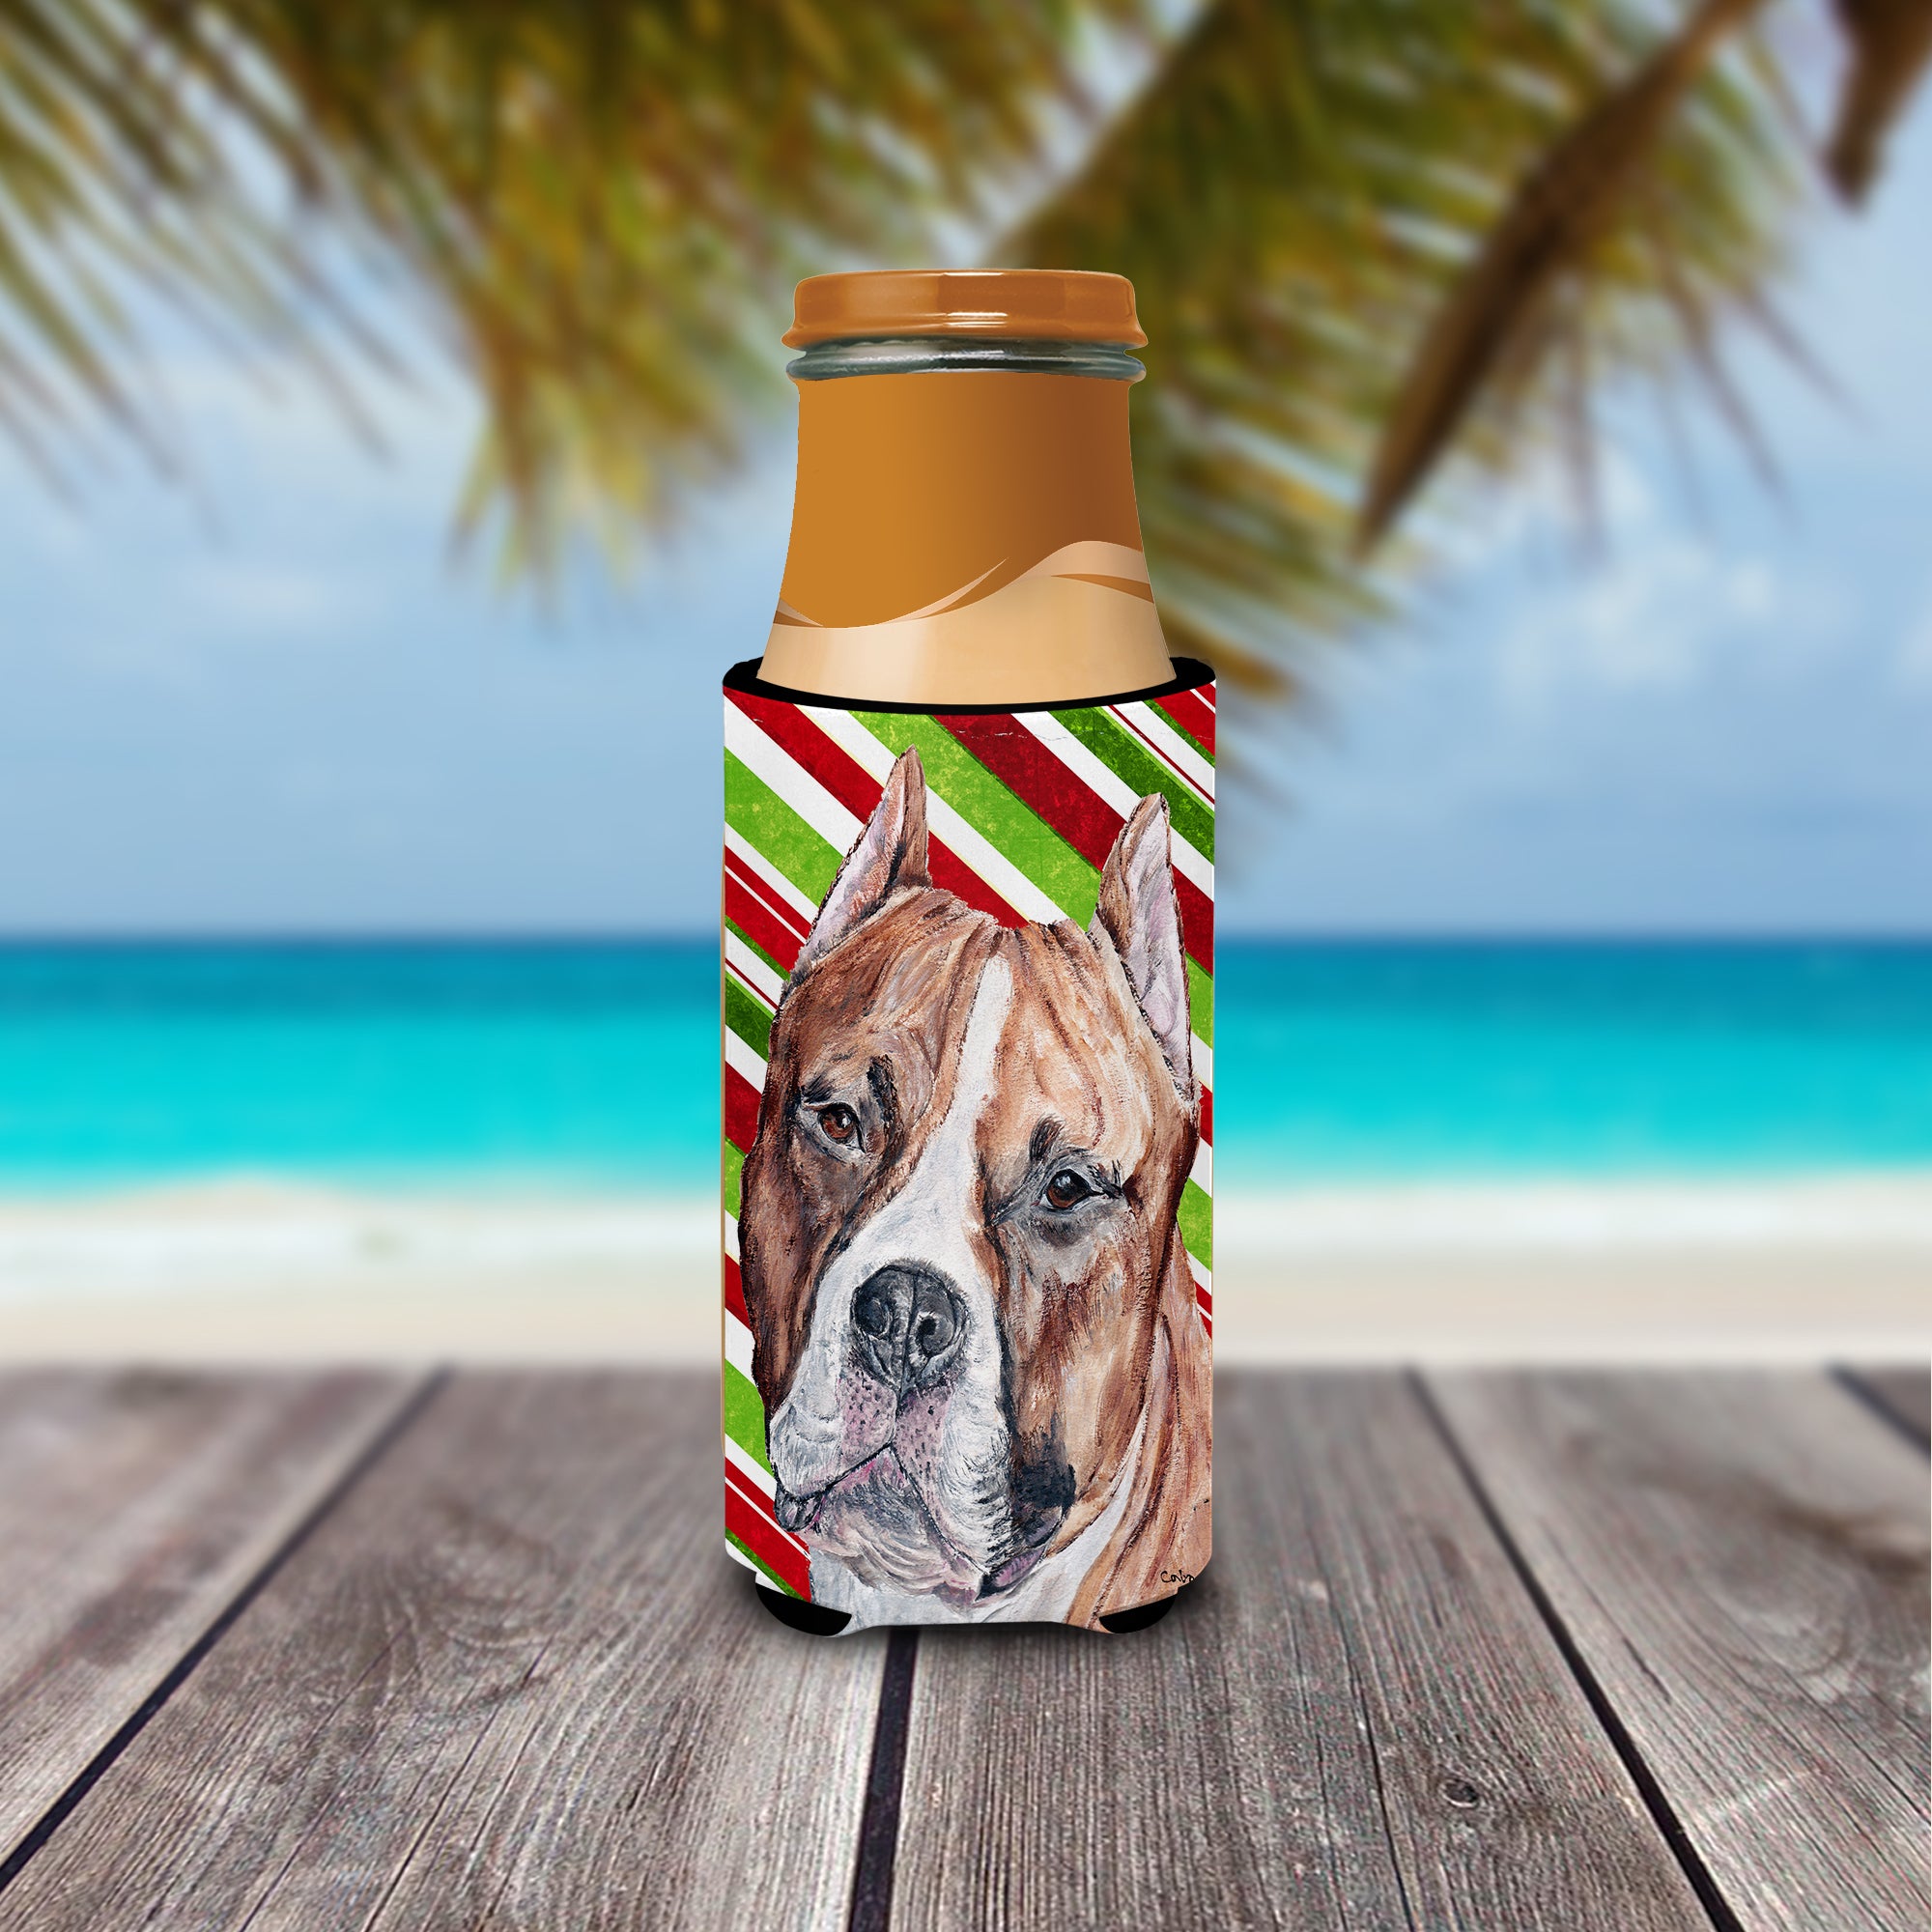 Staffordshire Bull Terrier Staffie Candy Cane Christmas Ultra Beverage Insulators for slim cans SC9800MUK